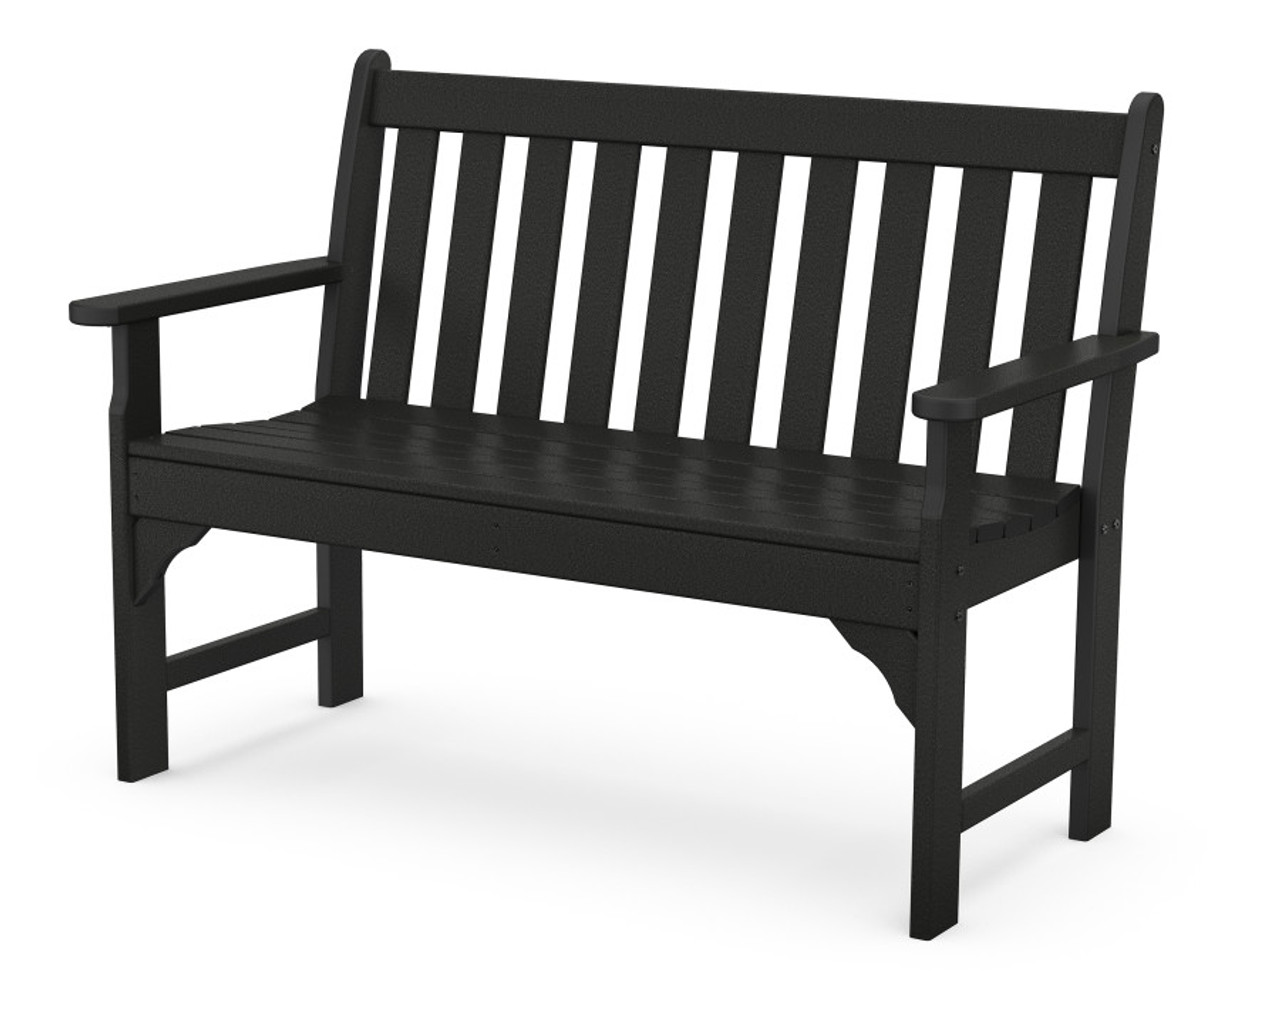 The Many Moods of Garden Benches